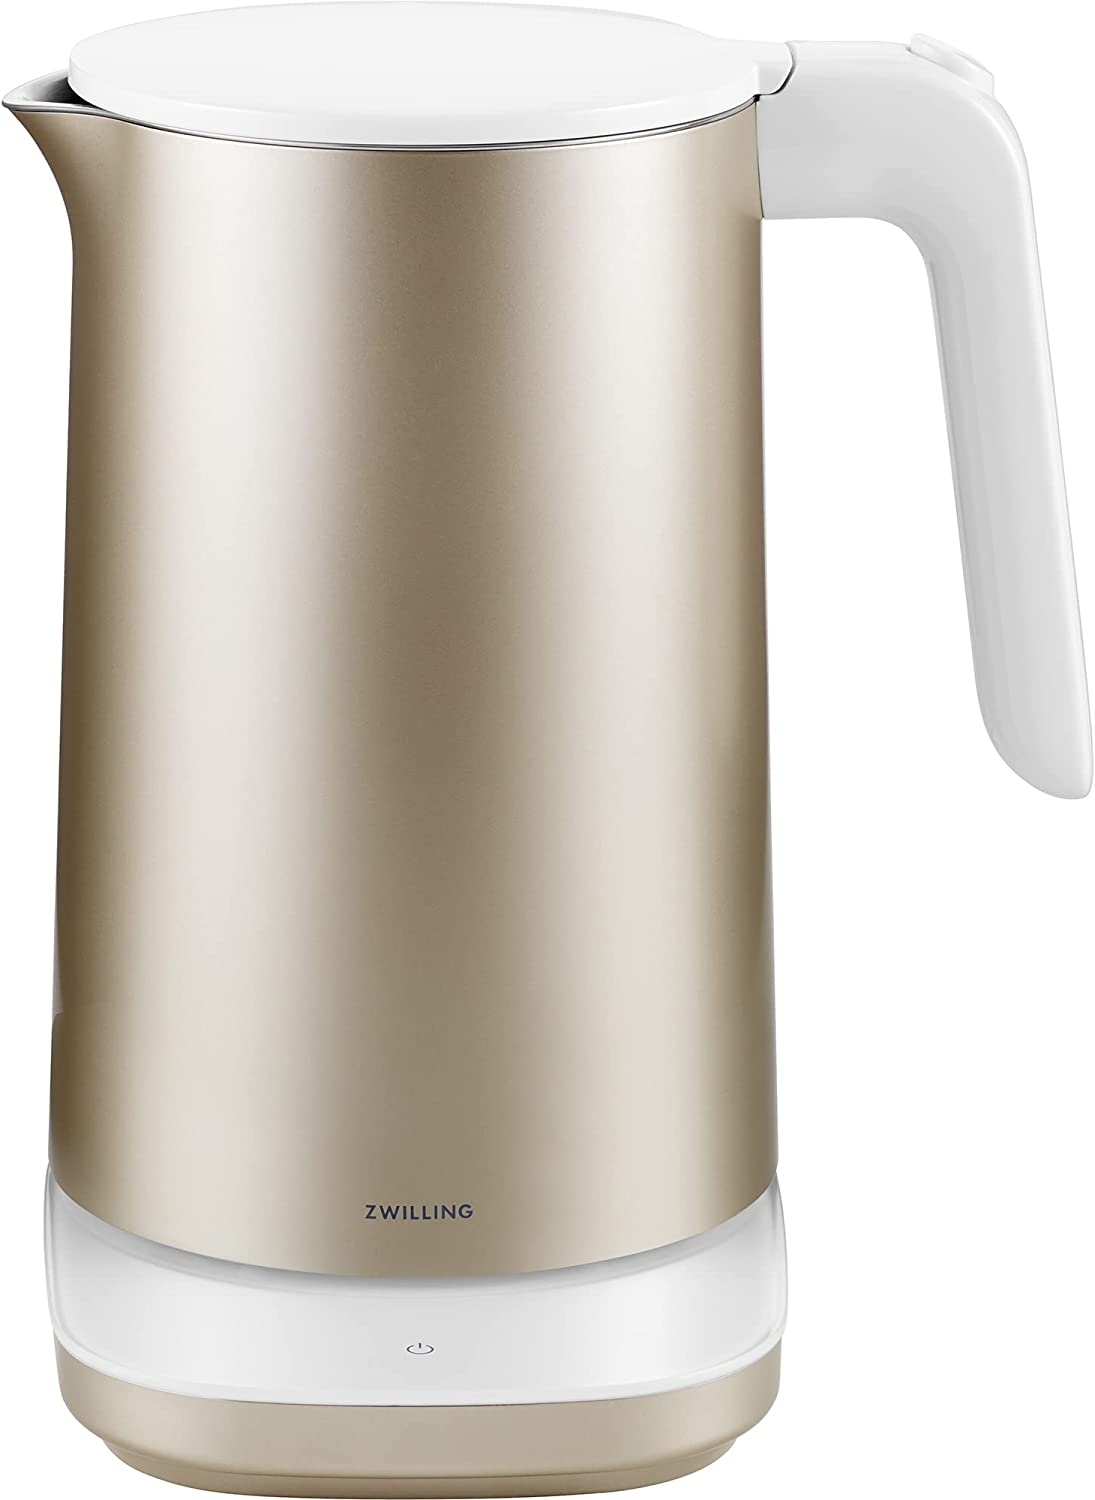 ZWILLING Enfinigy Cool Touch 1.5-Liter Electric Kettle, Cordless Tea Kettle & Hot Water Import To Shop ×Product customization